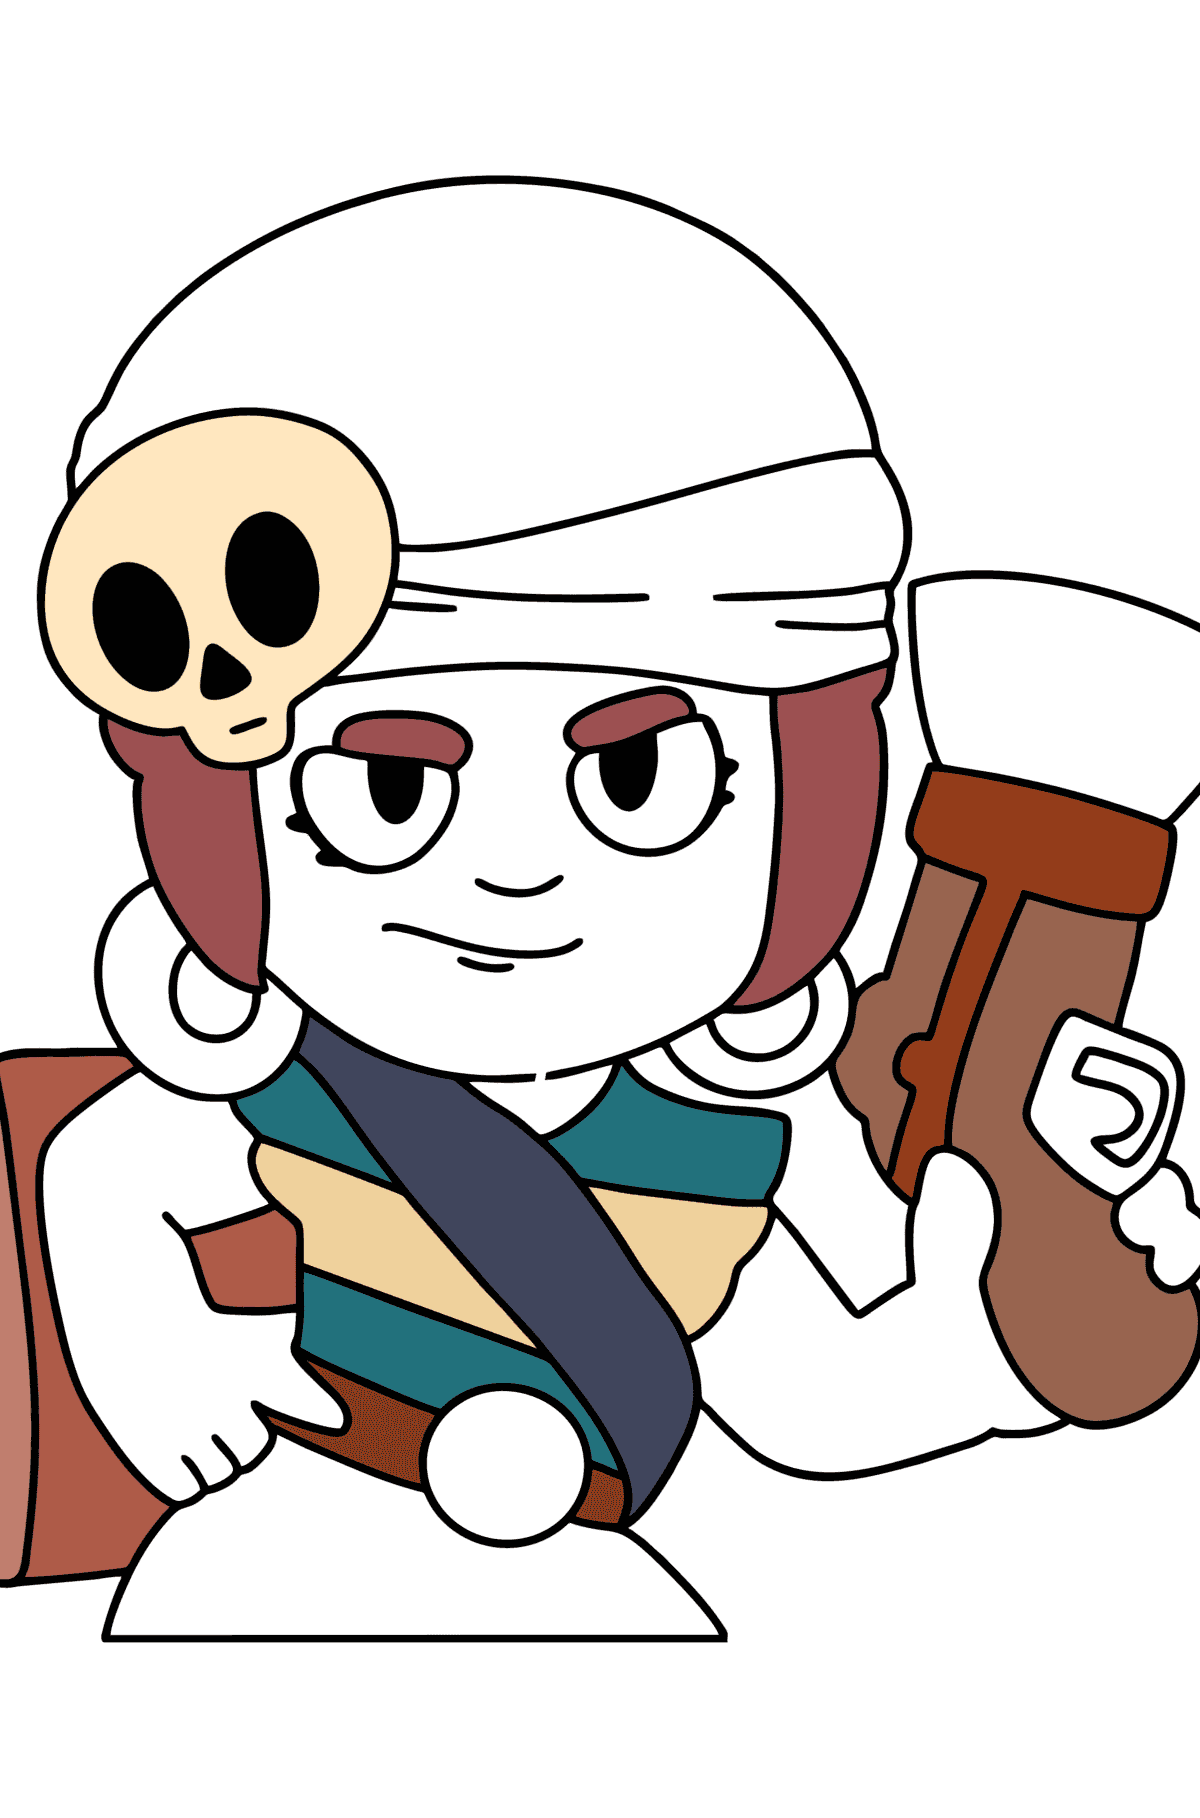 Brawl Stars Penny coloring page - Coloring Pages for Kids